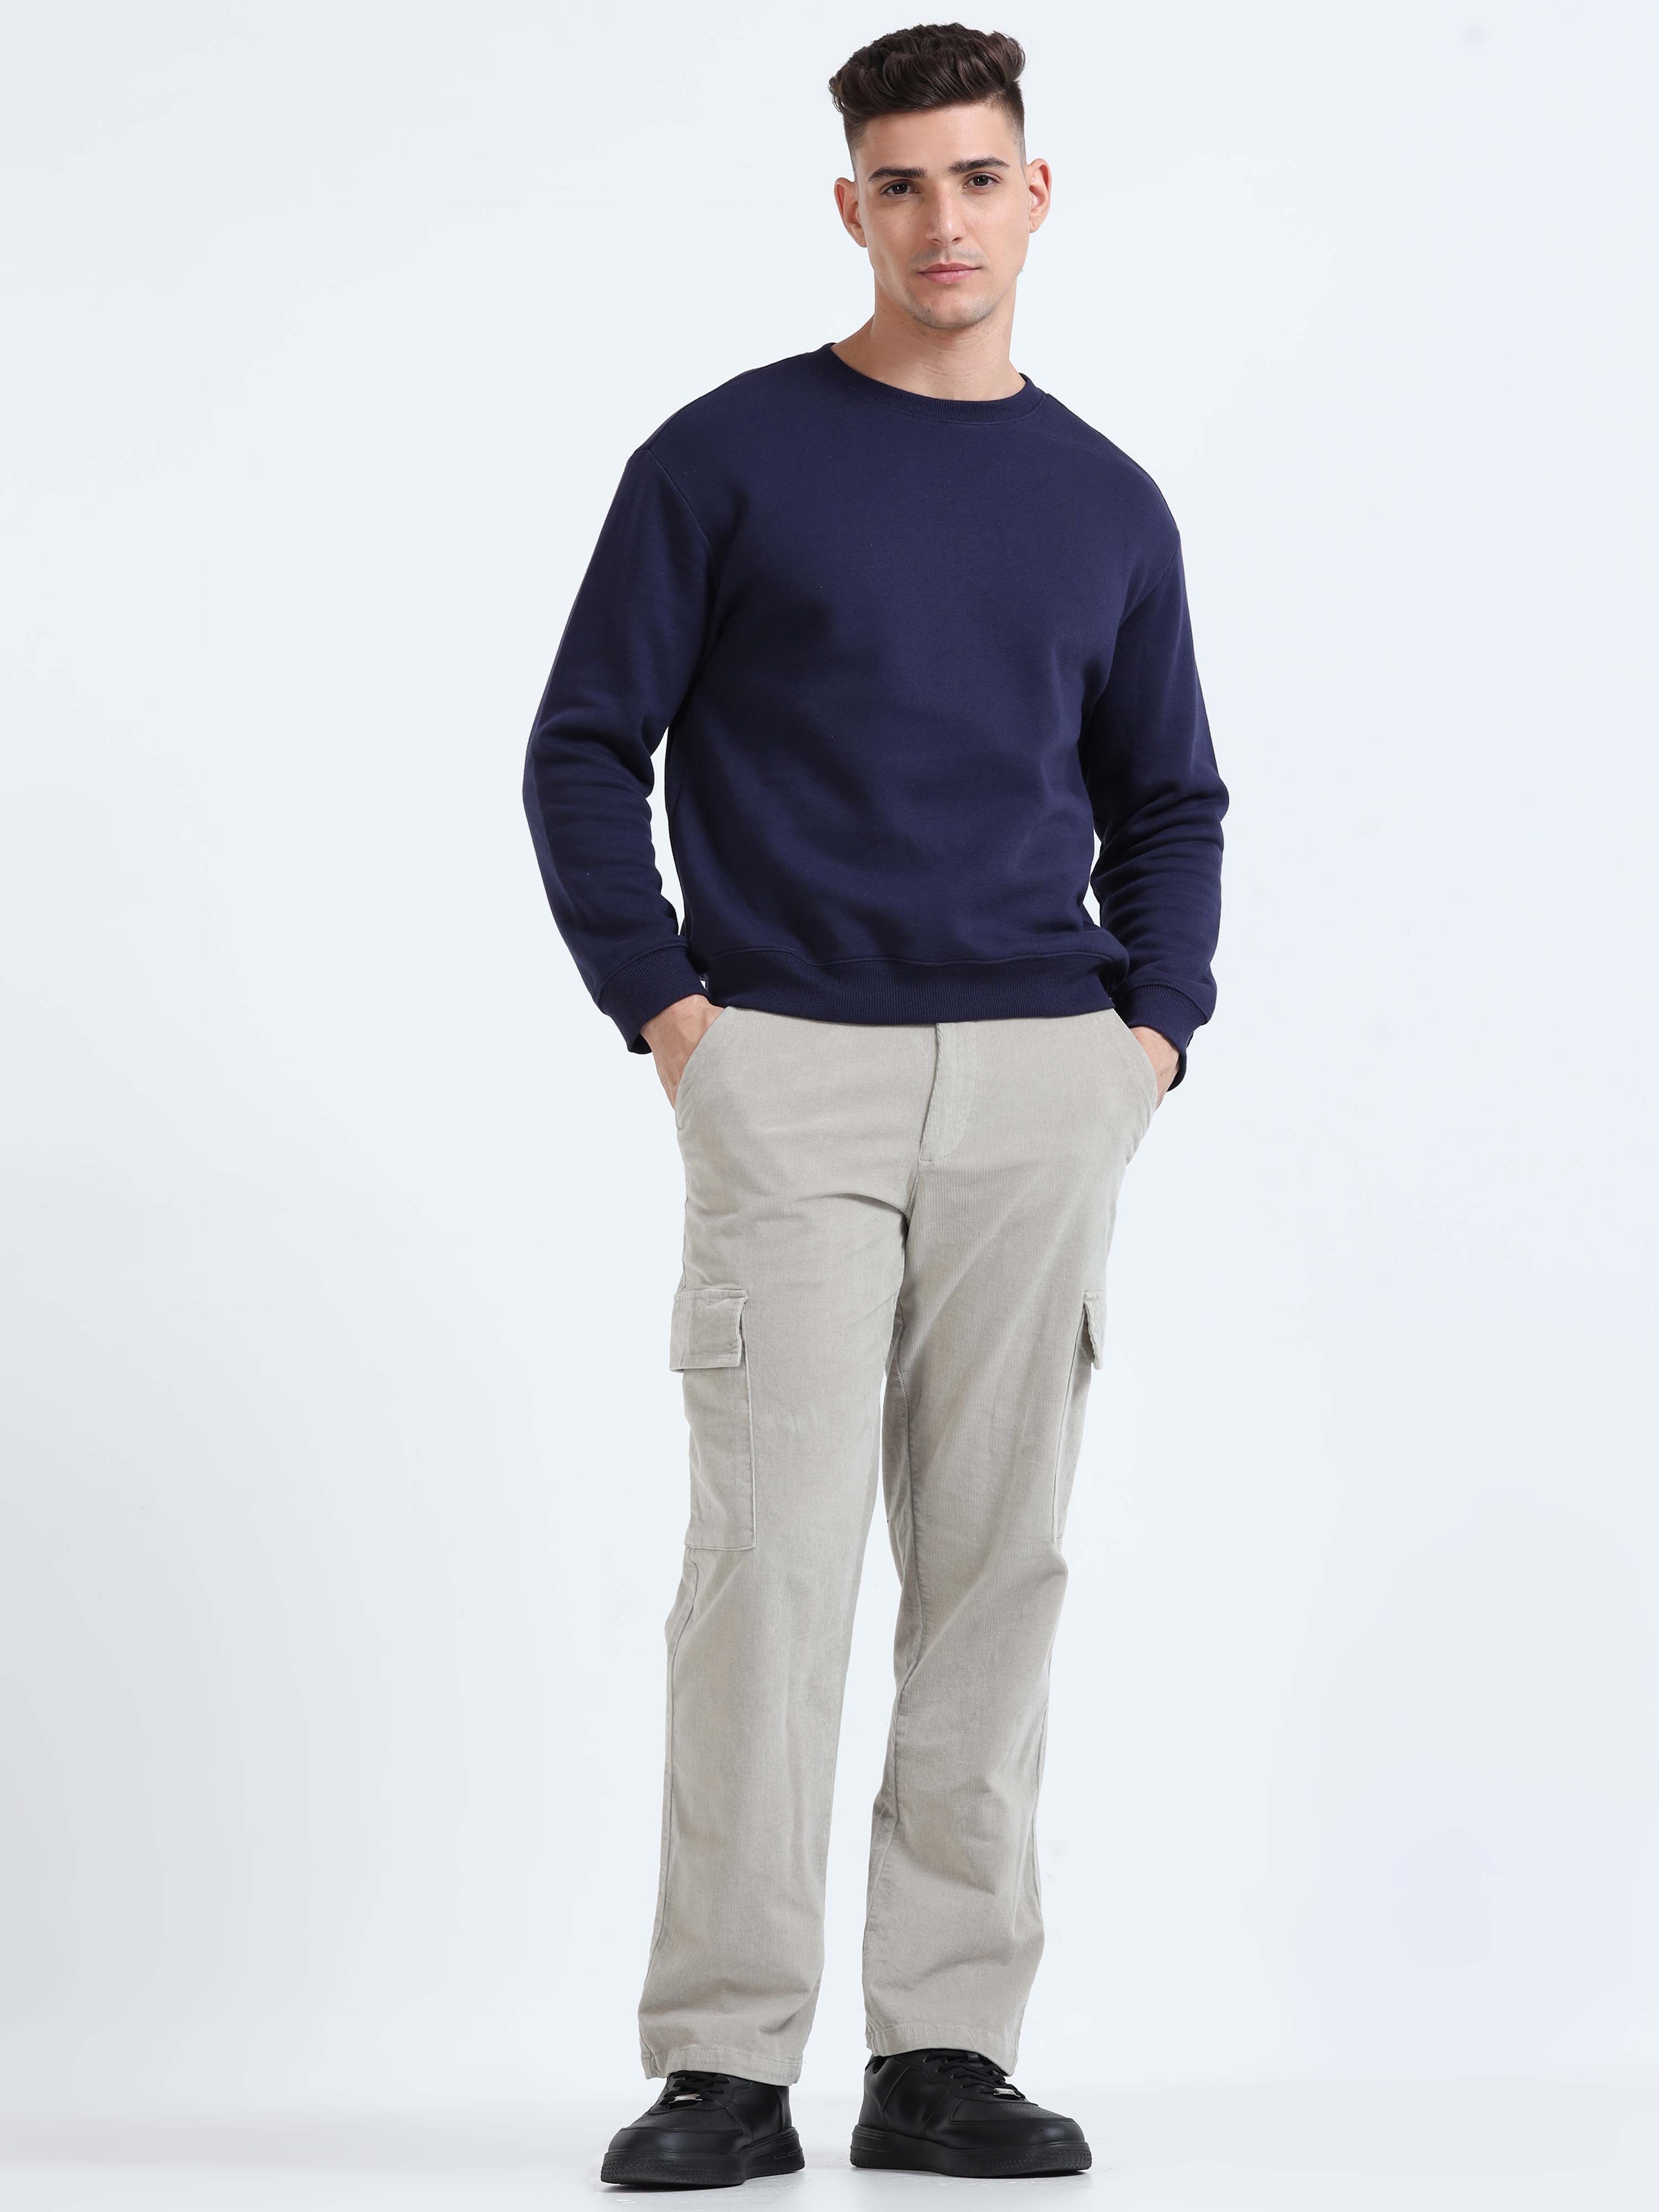 Soft Corduroy Light Grey Relaxed Cargo Pant